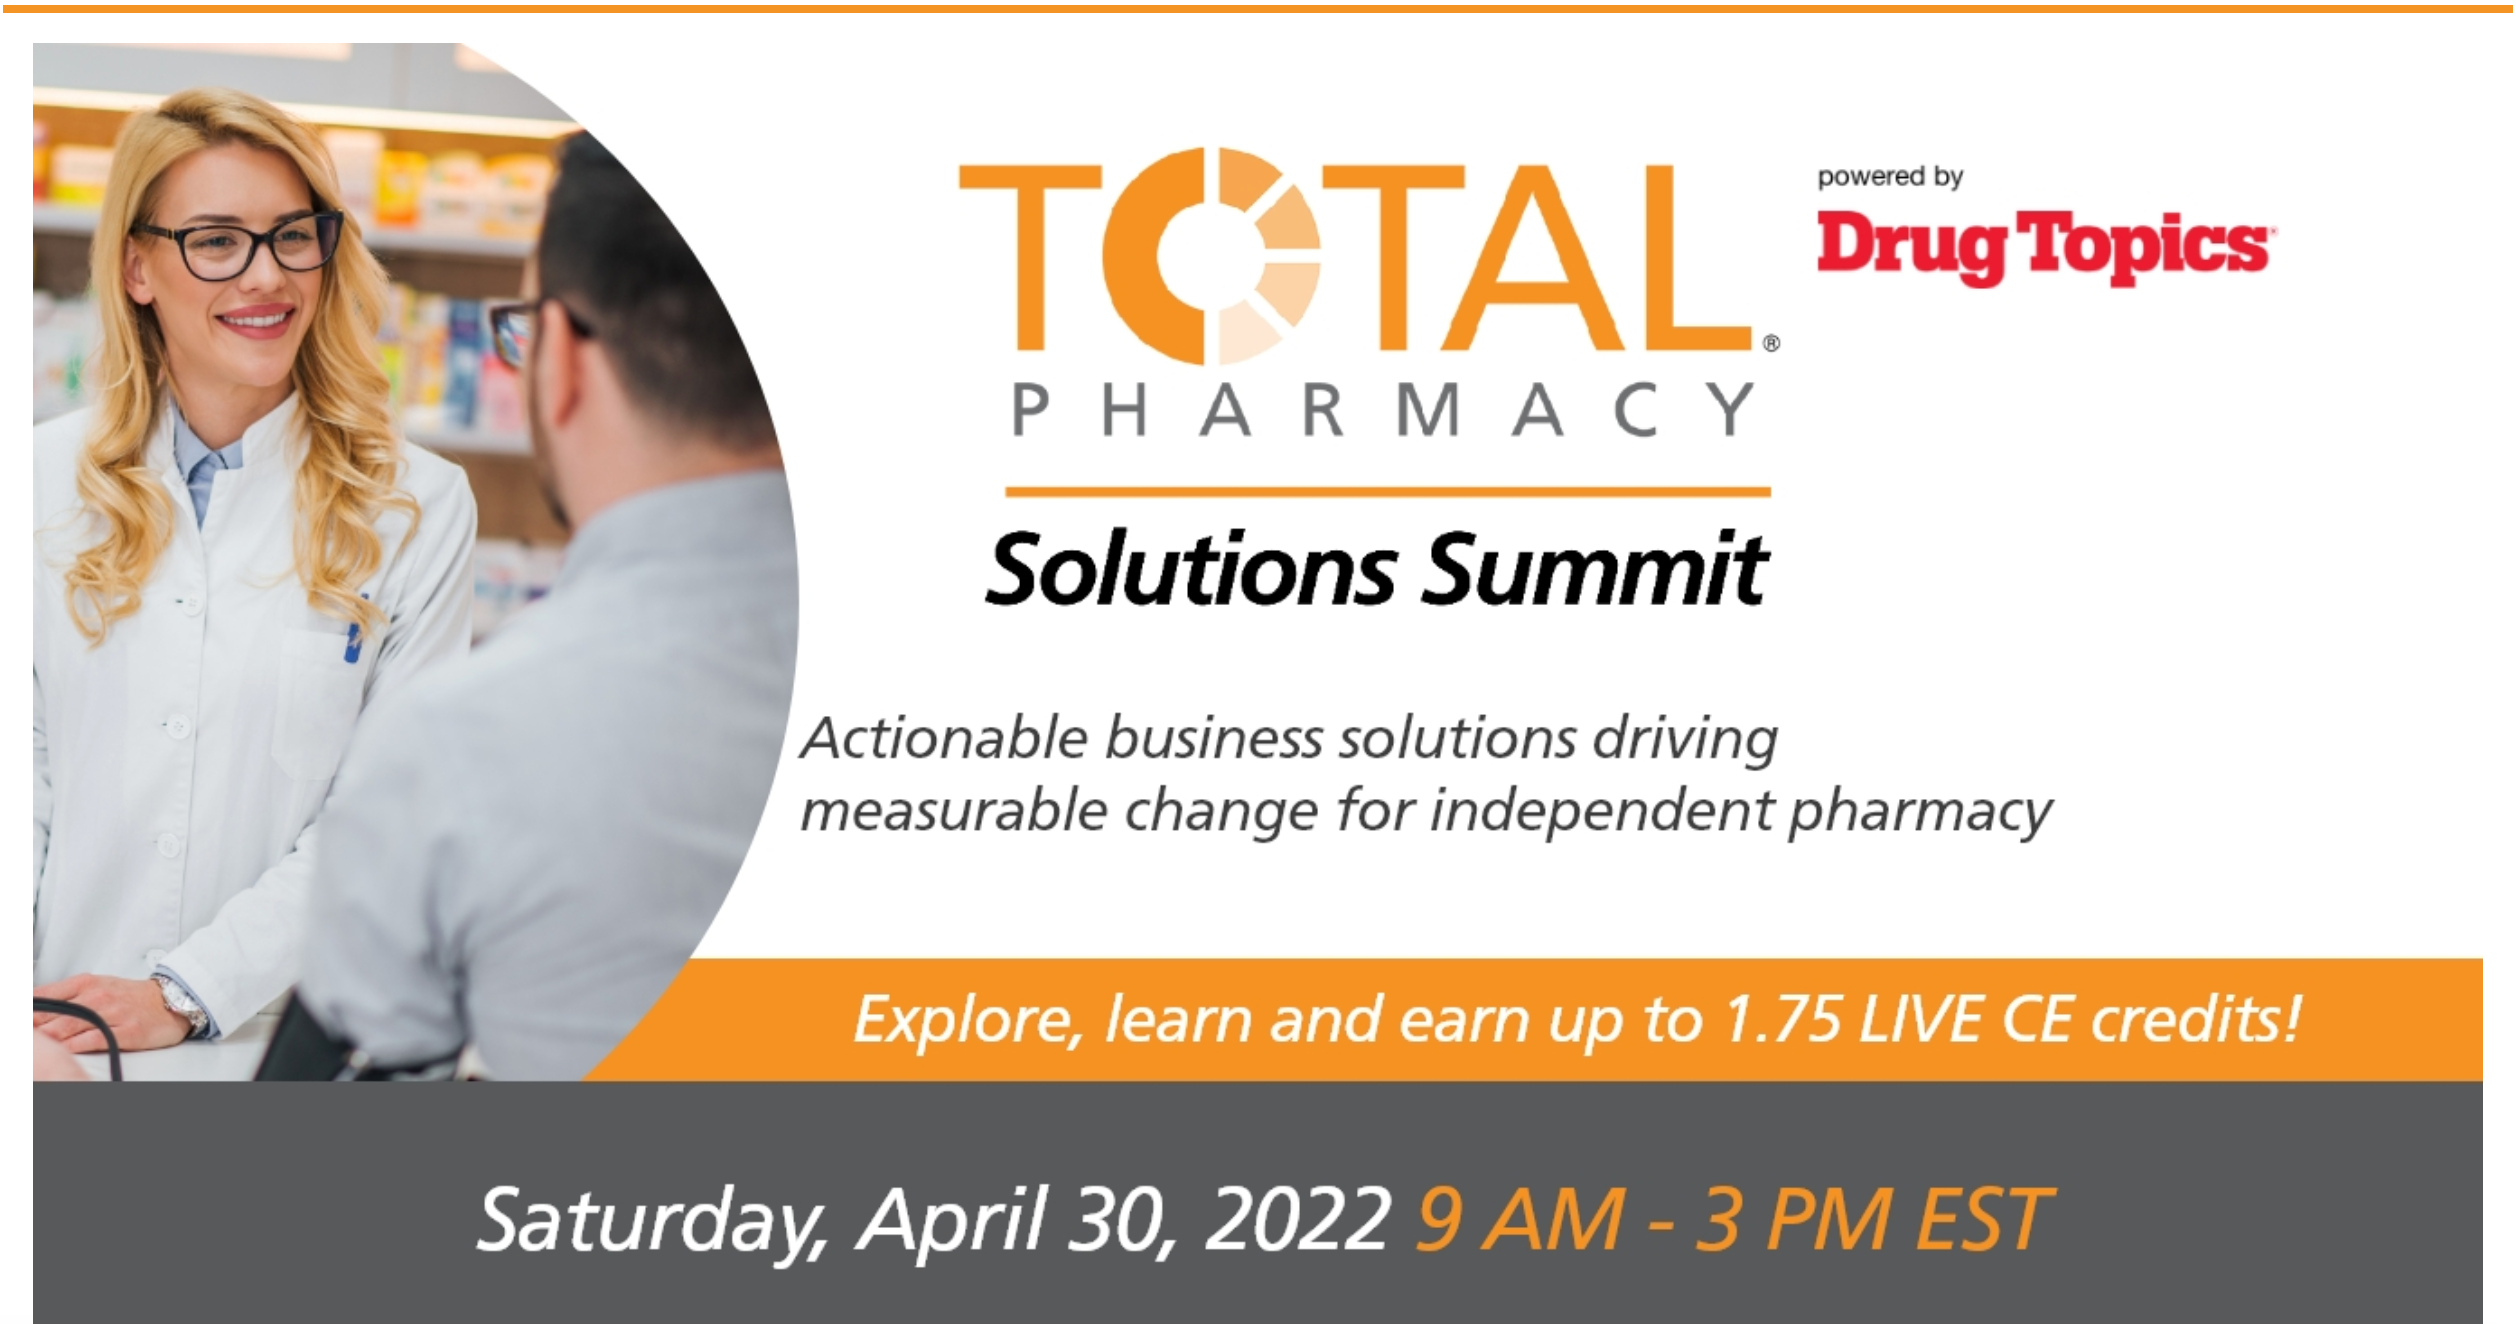 Total Pharmacy Solutions Summit to Provide Actionable Insights in Independent Pharmacy